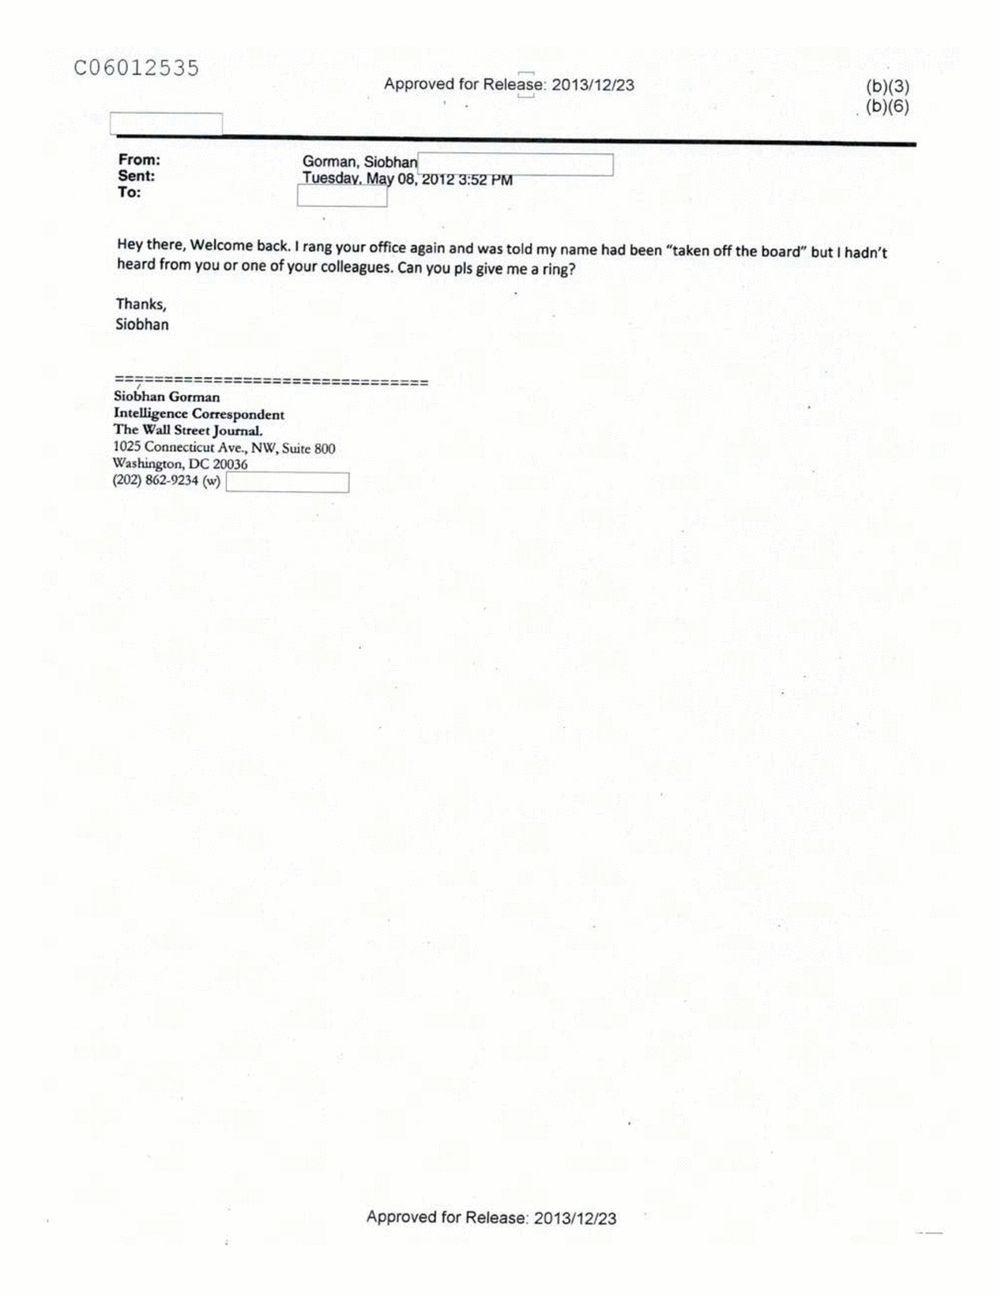 Page 68 from Email Correspondence Between Reporters and CIA Flacks